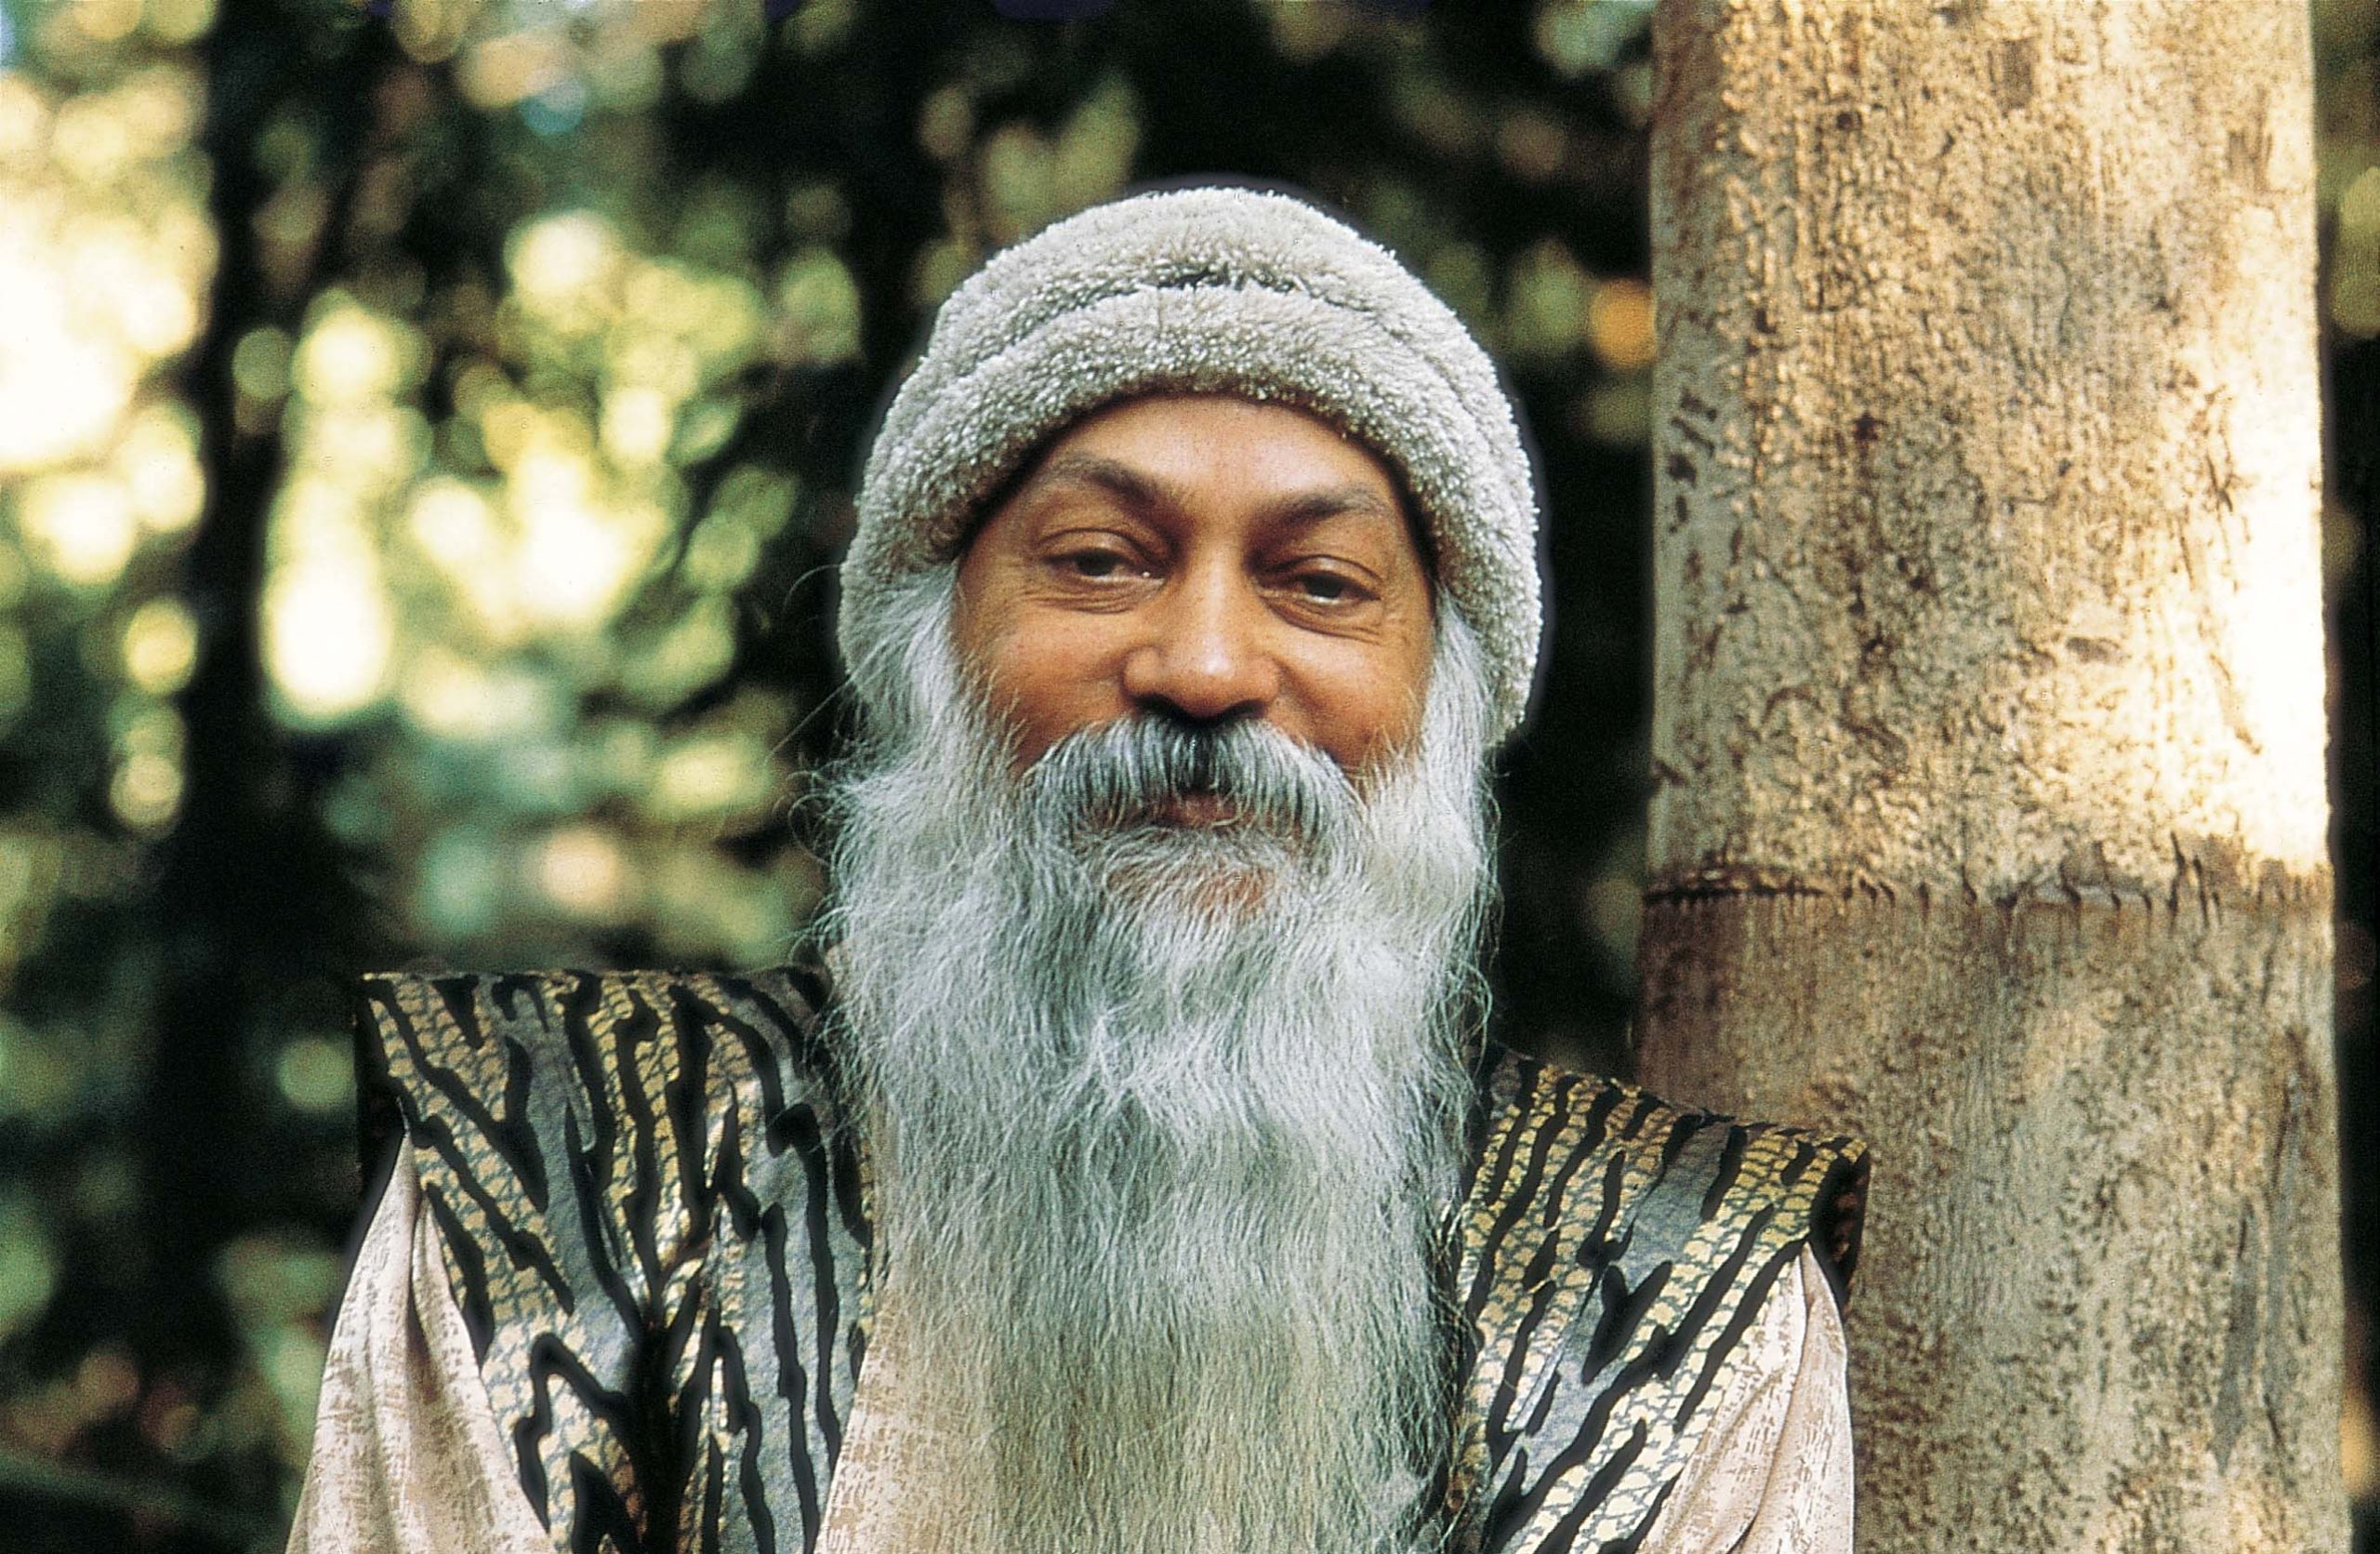 Your Daily Dose of OSHO!